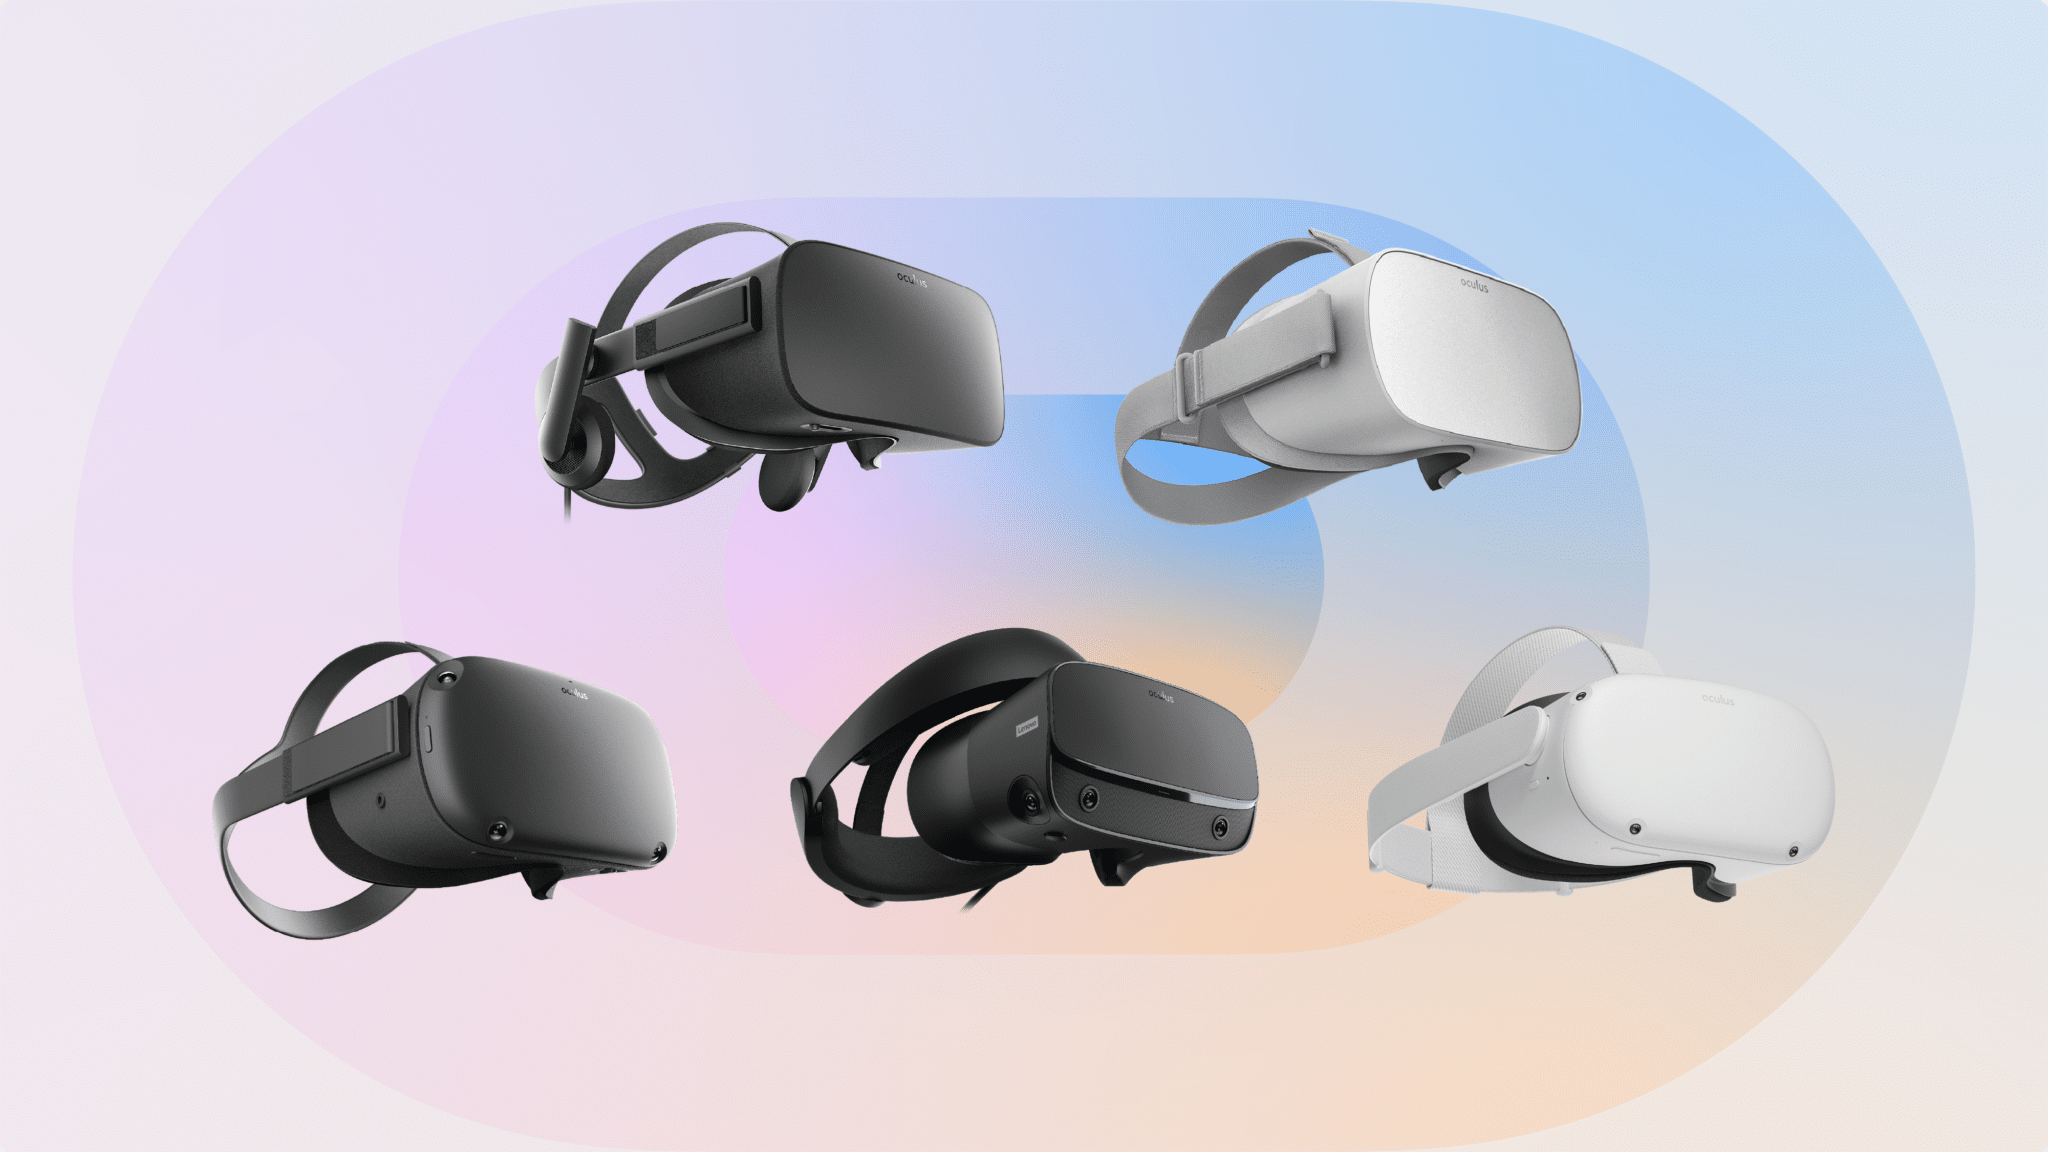 Facebook Says Quest 2 Outsold Every Previous Oculus Headset Combined